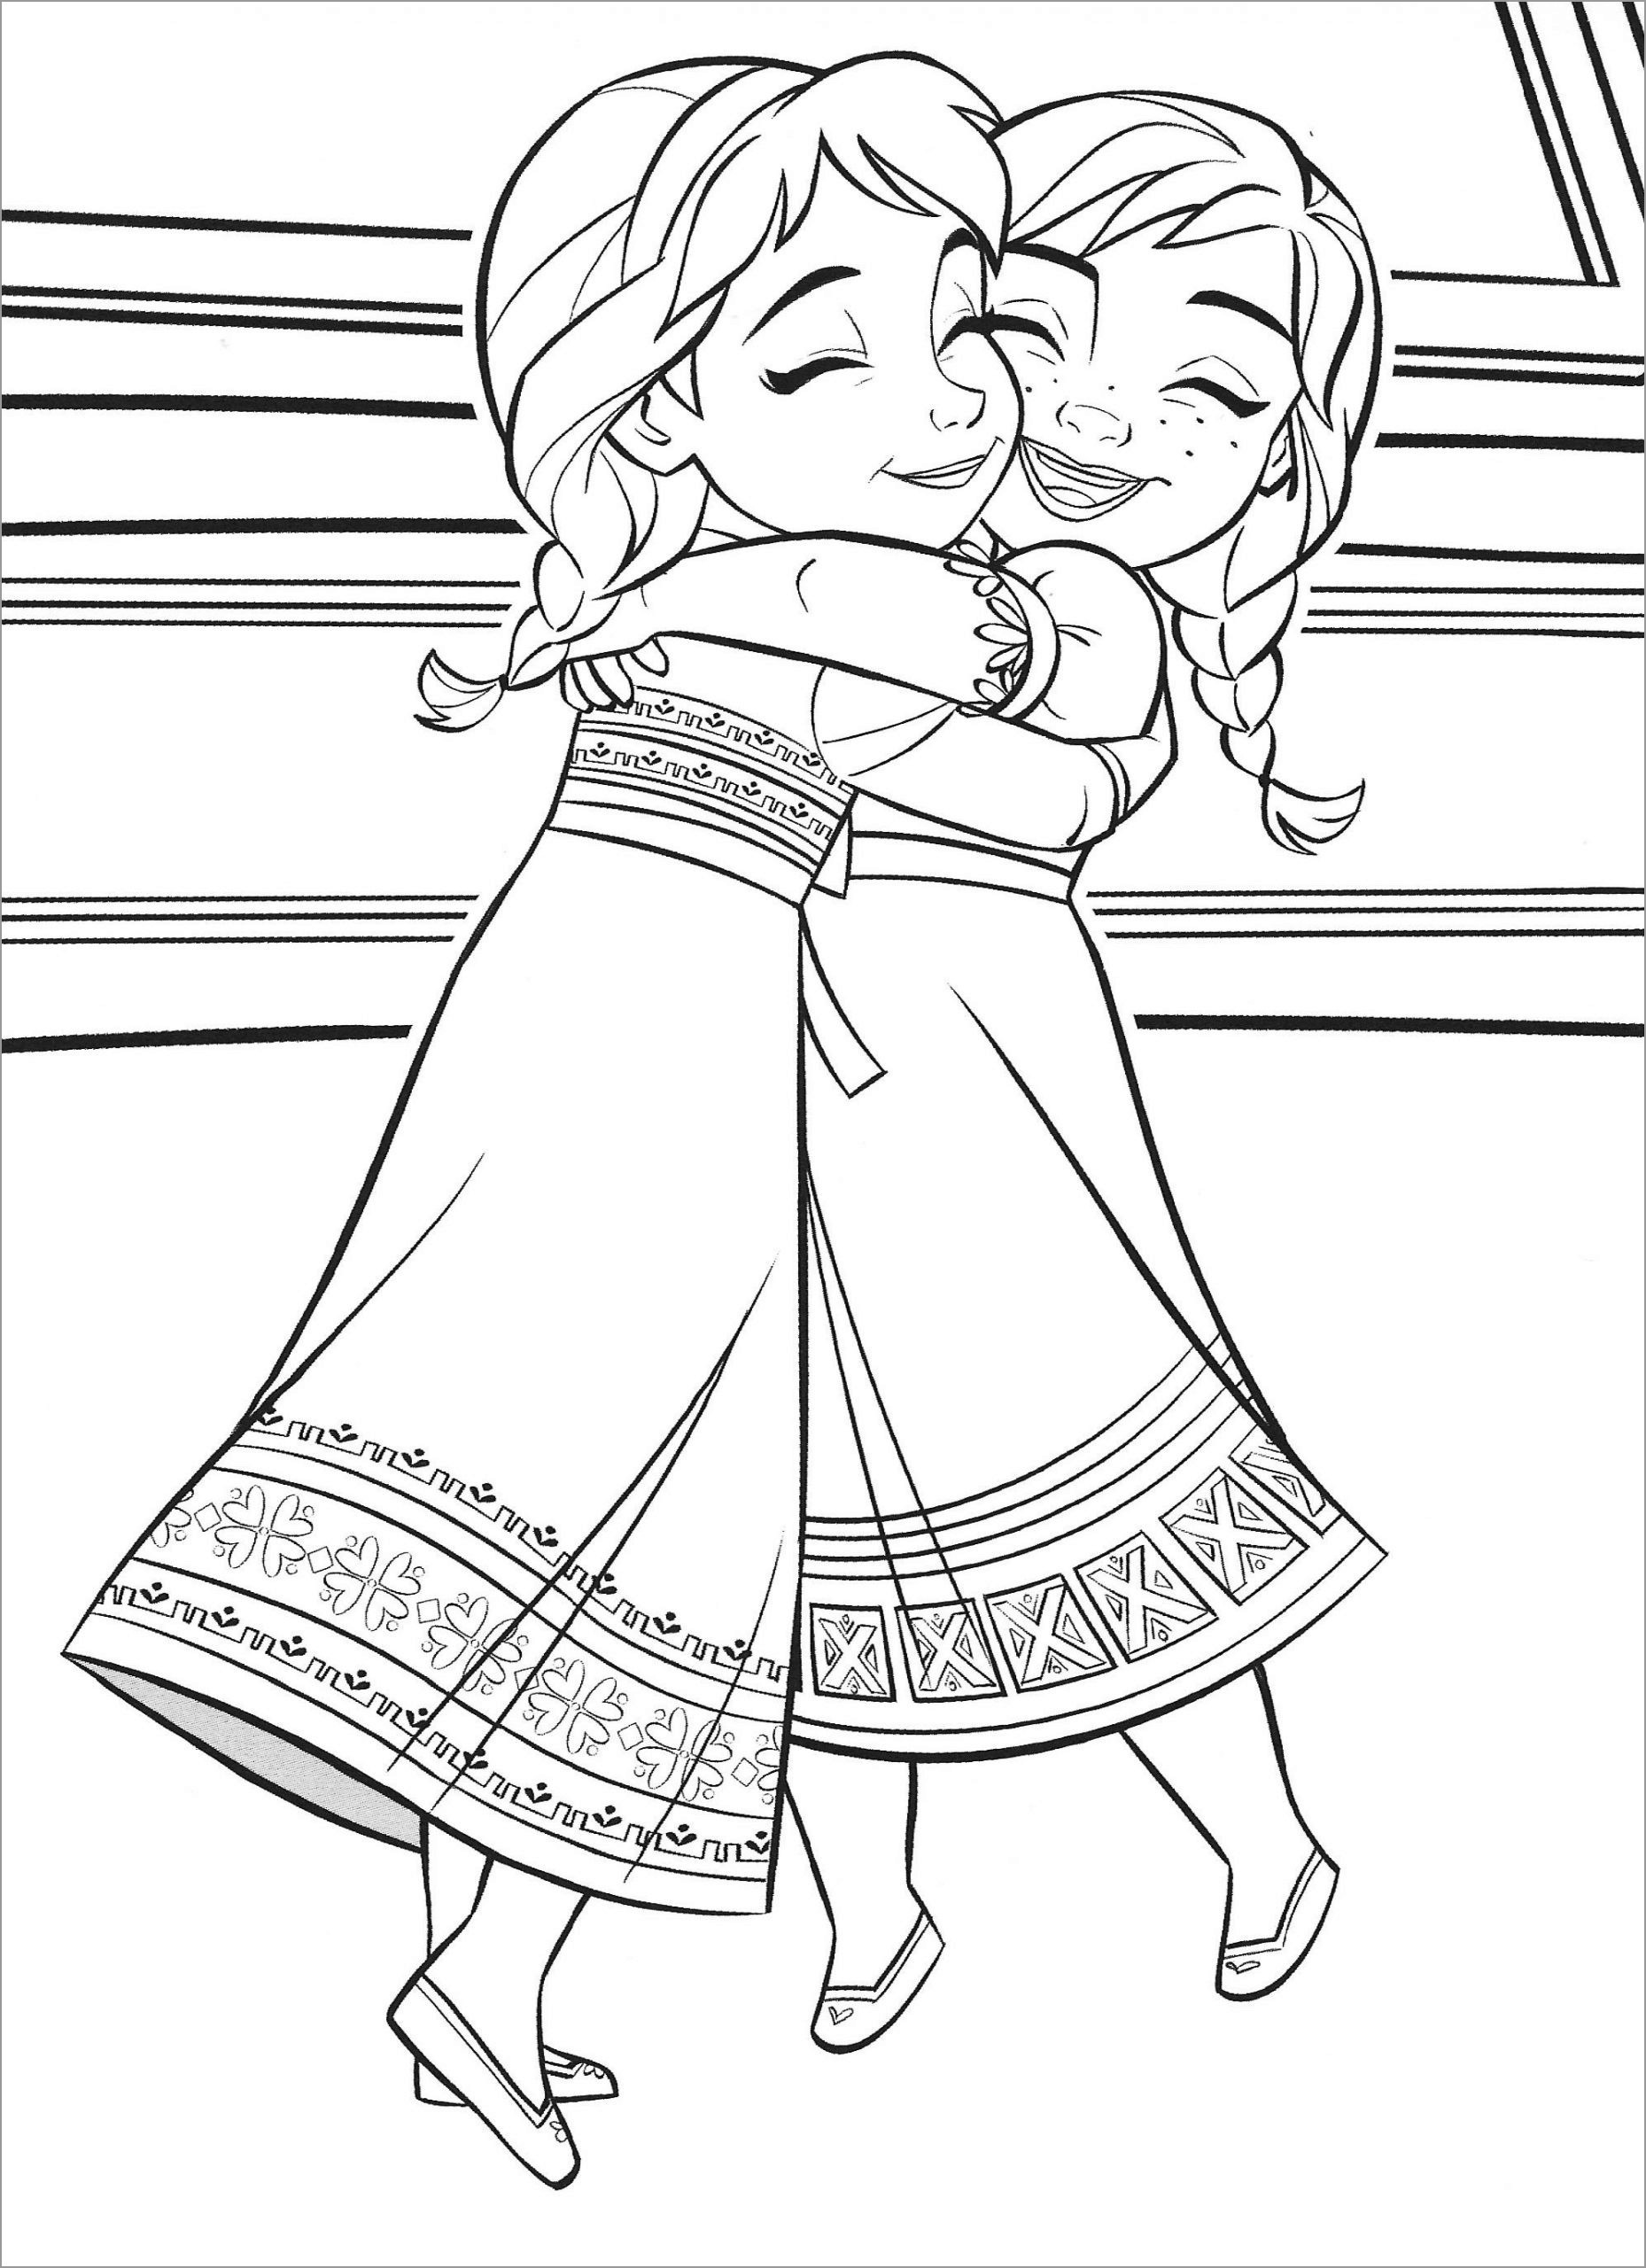 Baby Elsa and Anna Frozen Coloring Page   ColoringBay